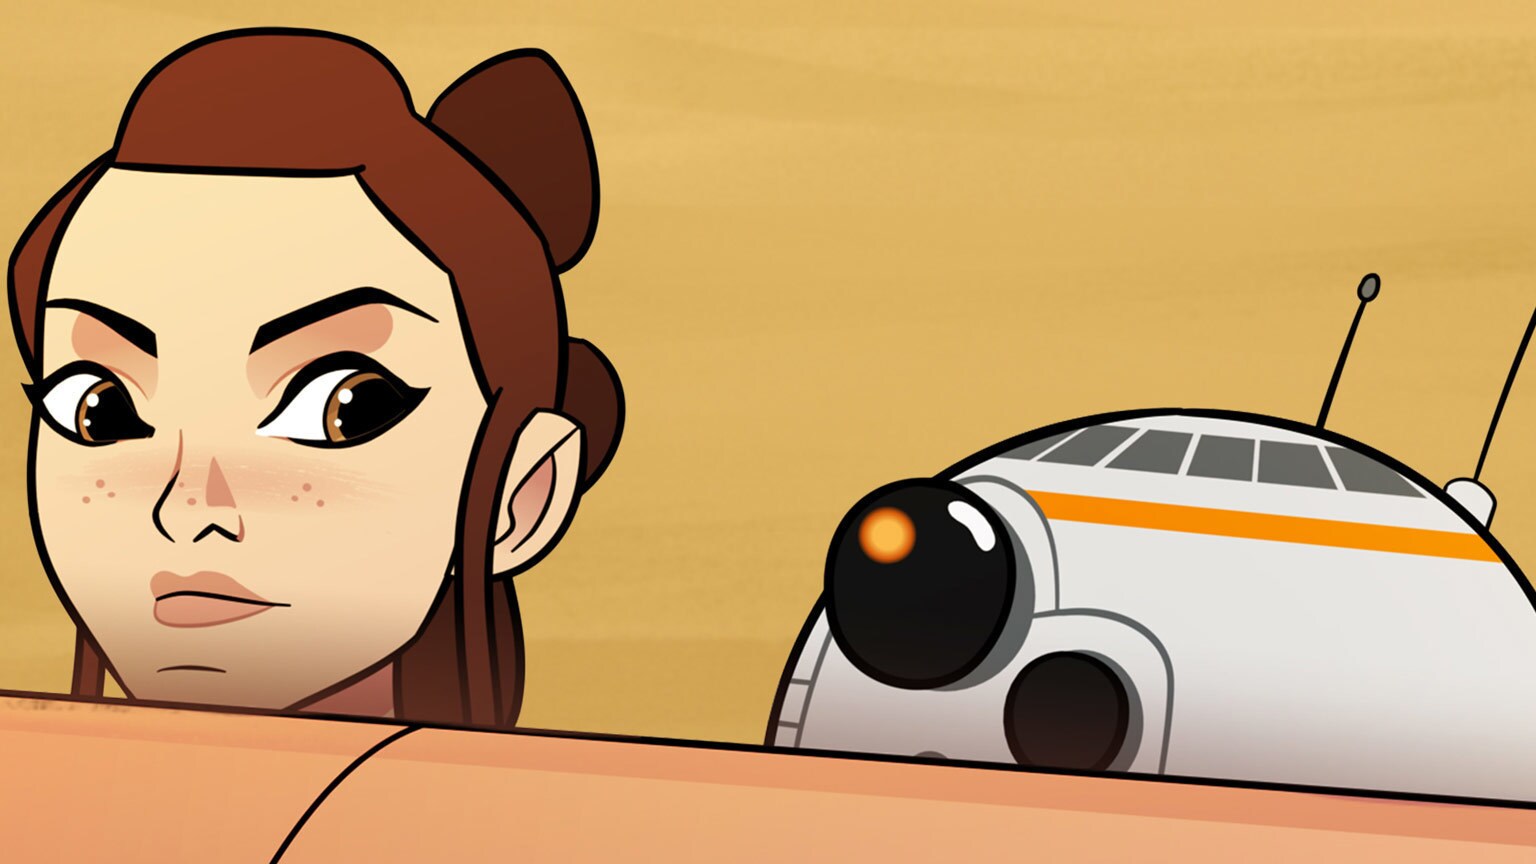 5 Highlights from Star Wars Forces of Destiny: “BB-8 Bandits”